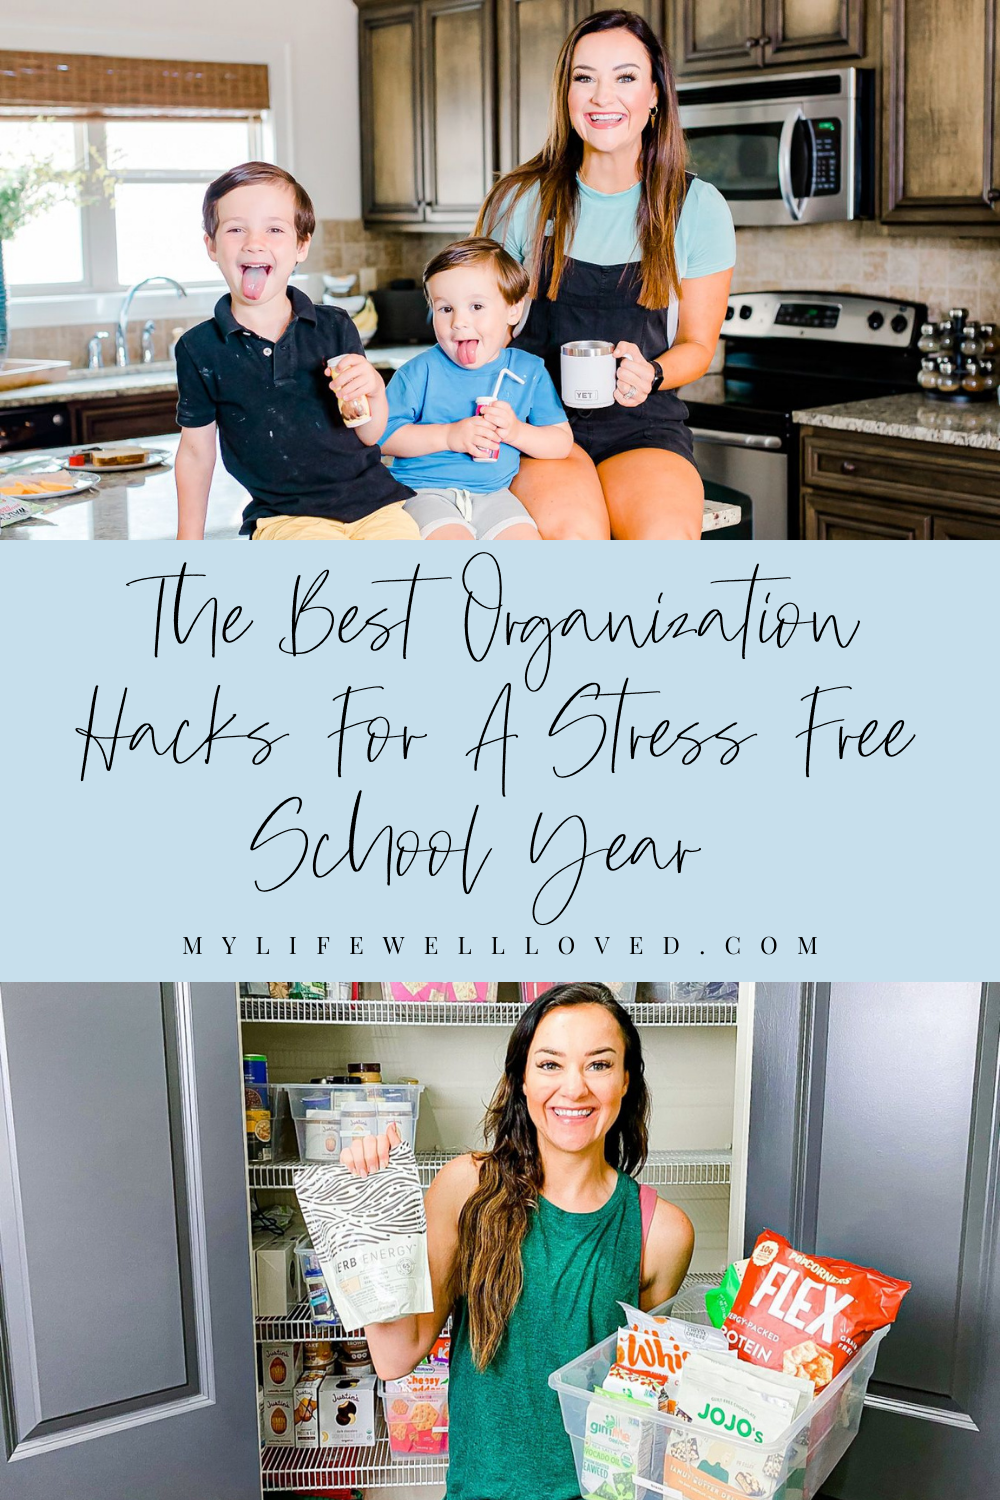 Alabama mom + lifestyle blogger, My Life Well Loved, shares her back to school tips for organization. Click here to read!